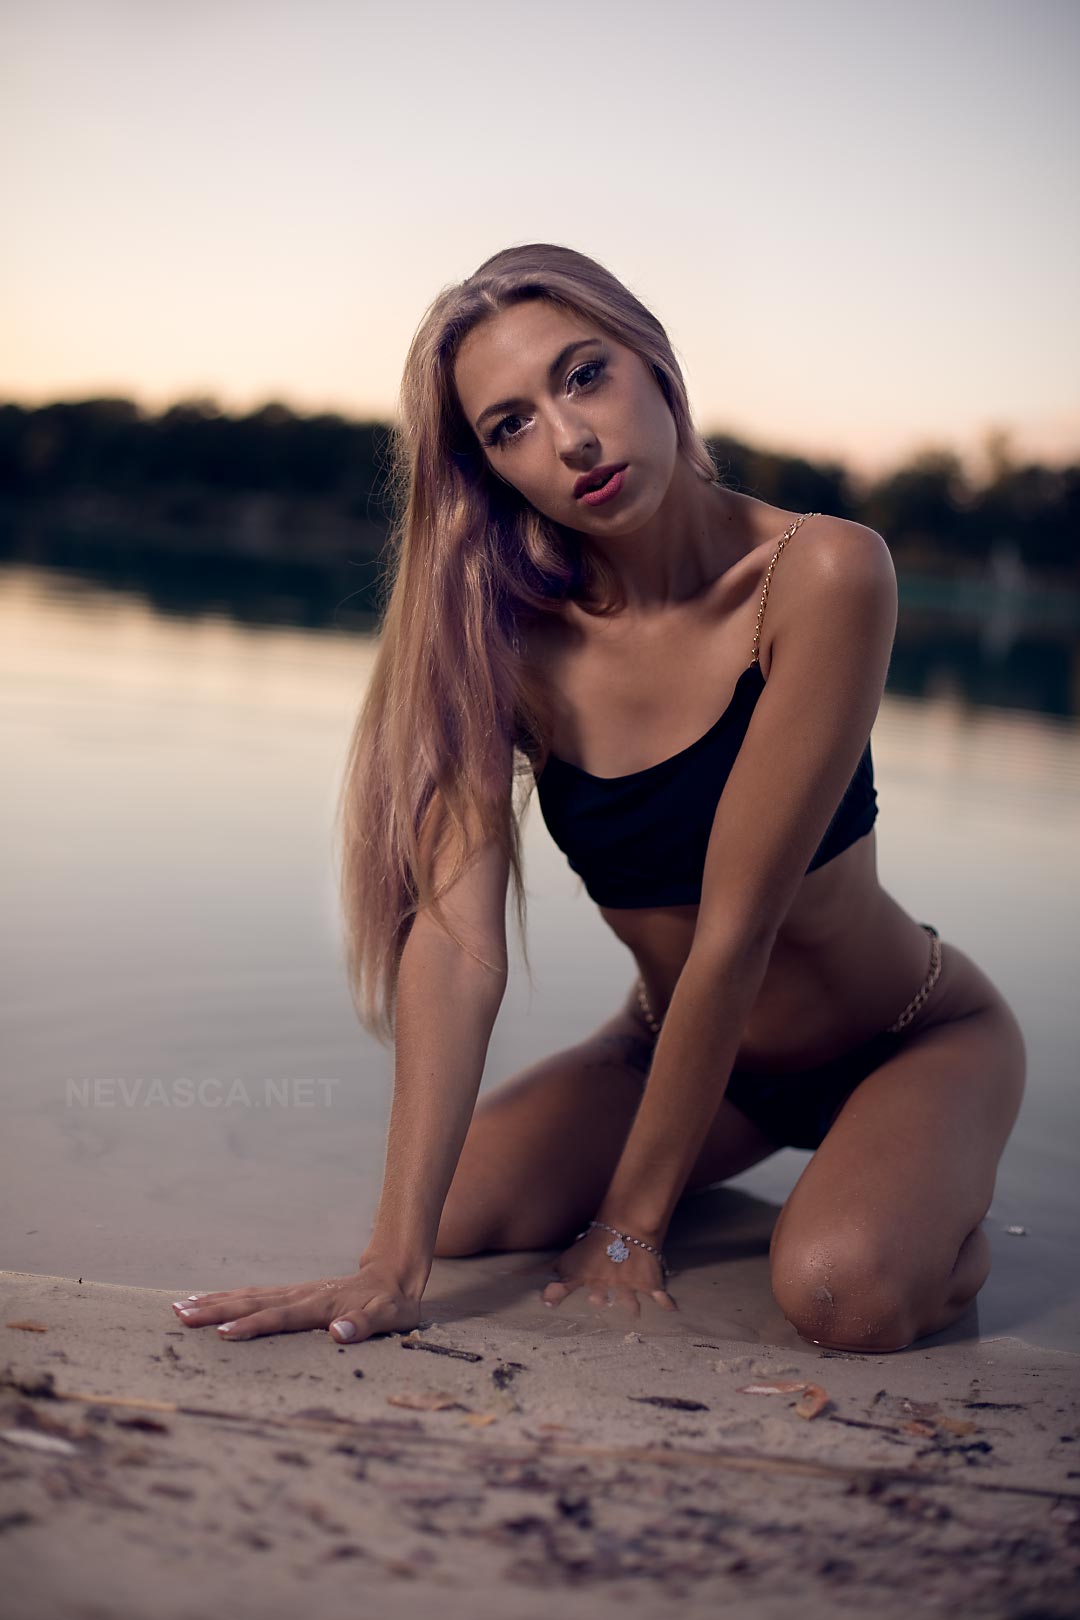 A young woman wearing black swimwear is sitting in front of a lake.